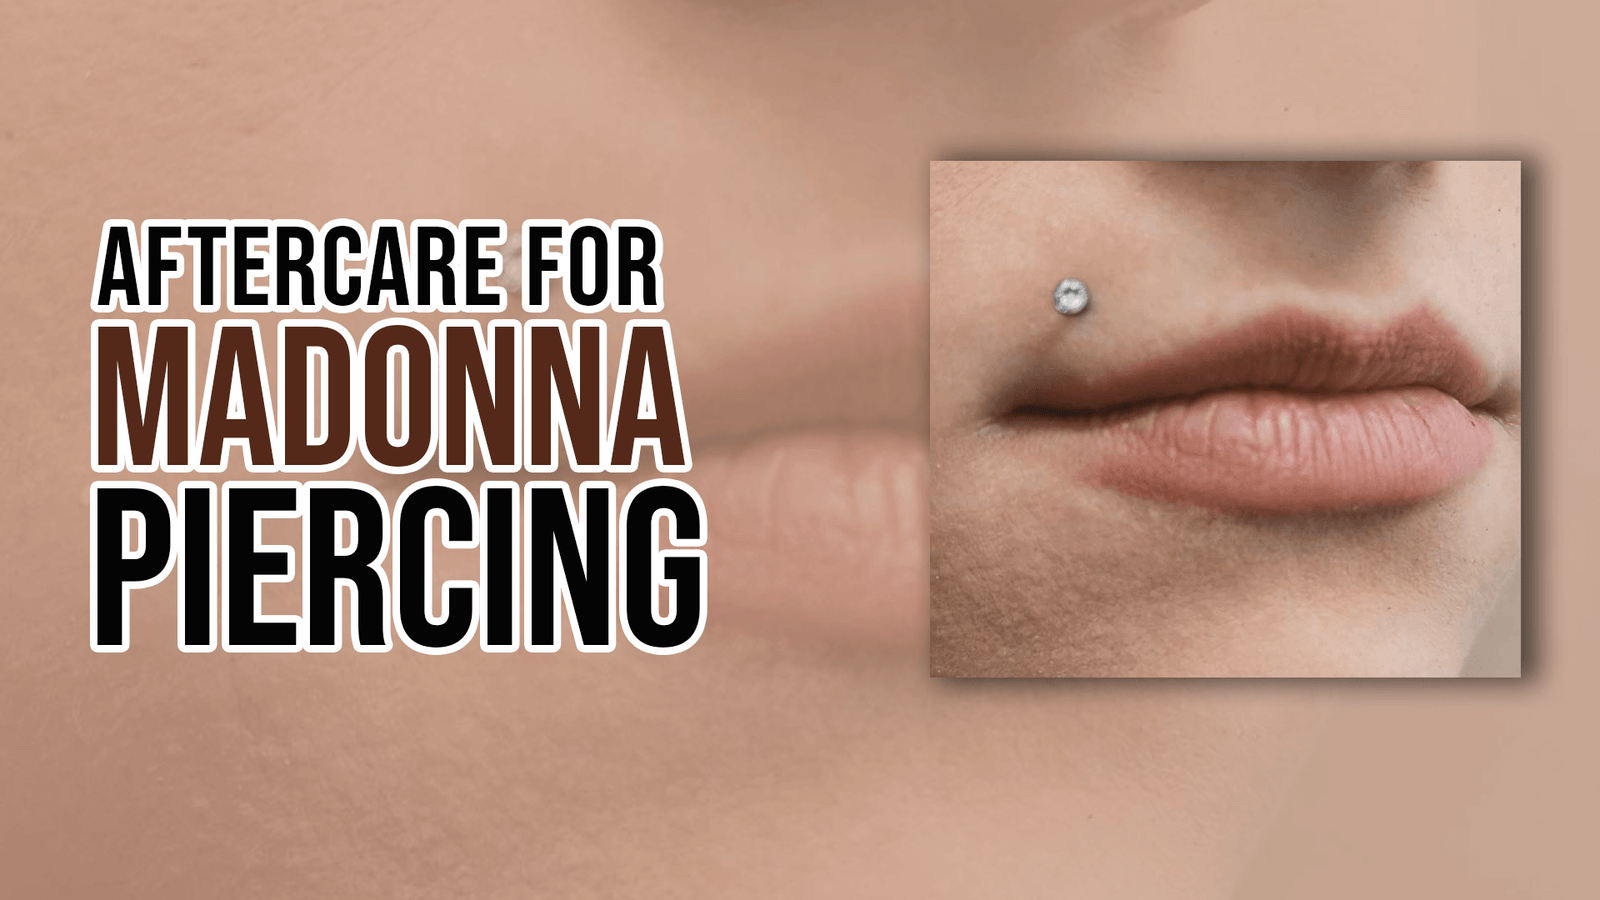 Aftercare for Madonna Piercing